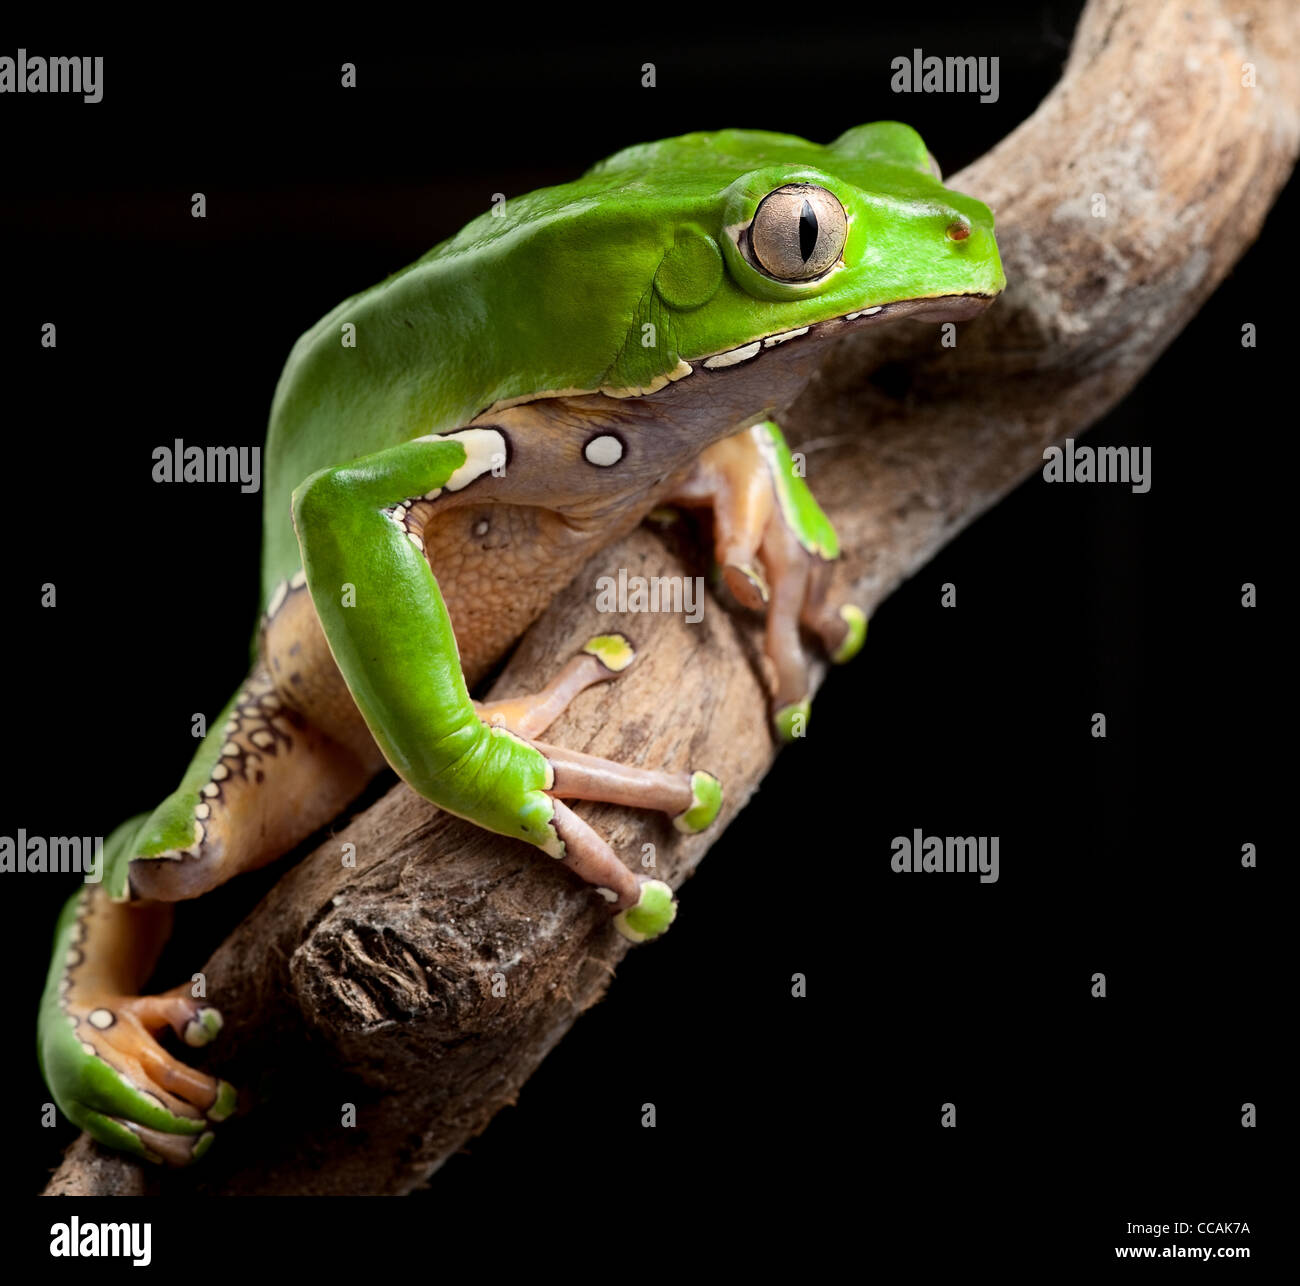 green tree frog amazon rain forest exotic tropical amphibian pet at night in jungle Stock Photo